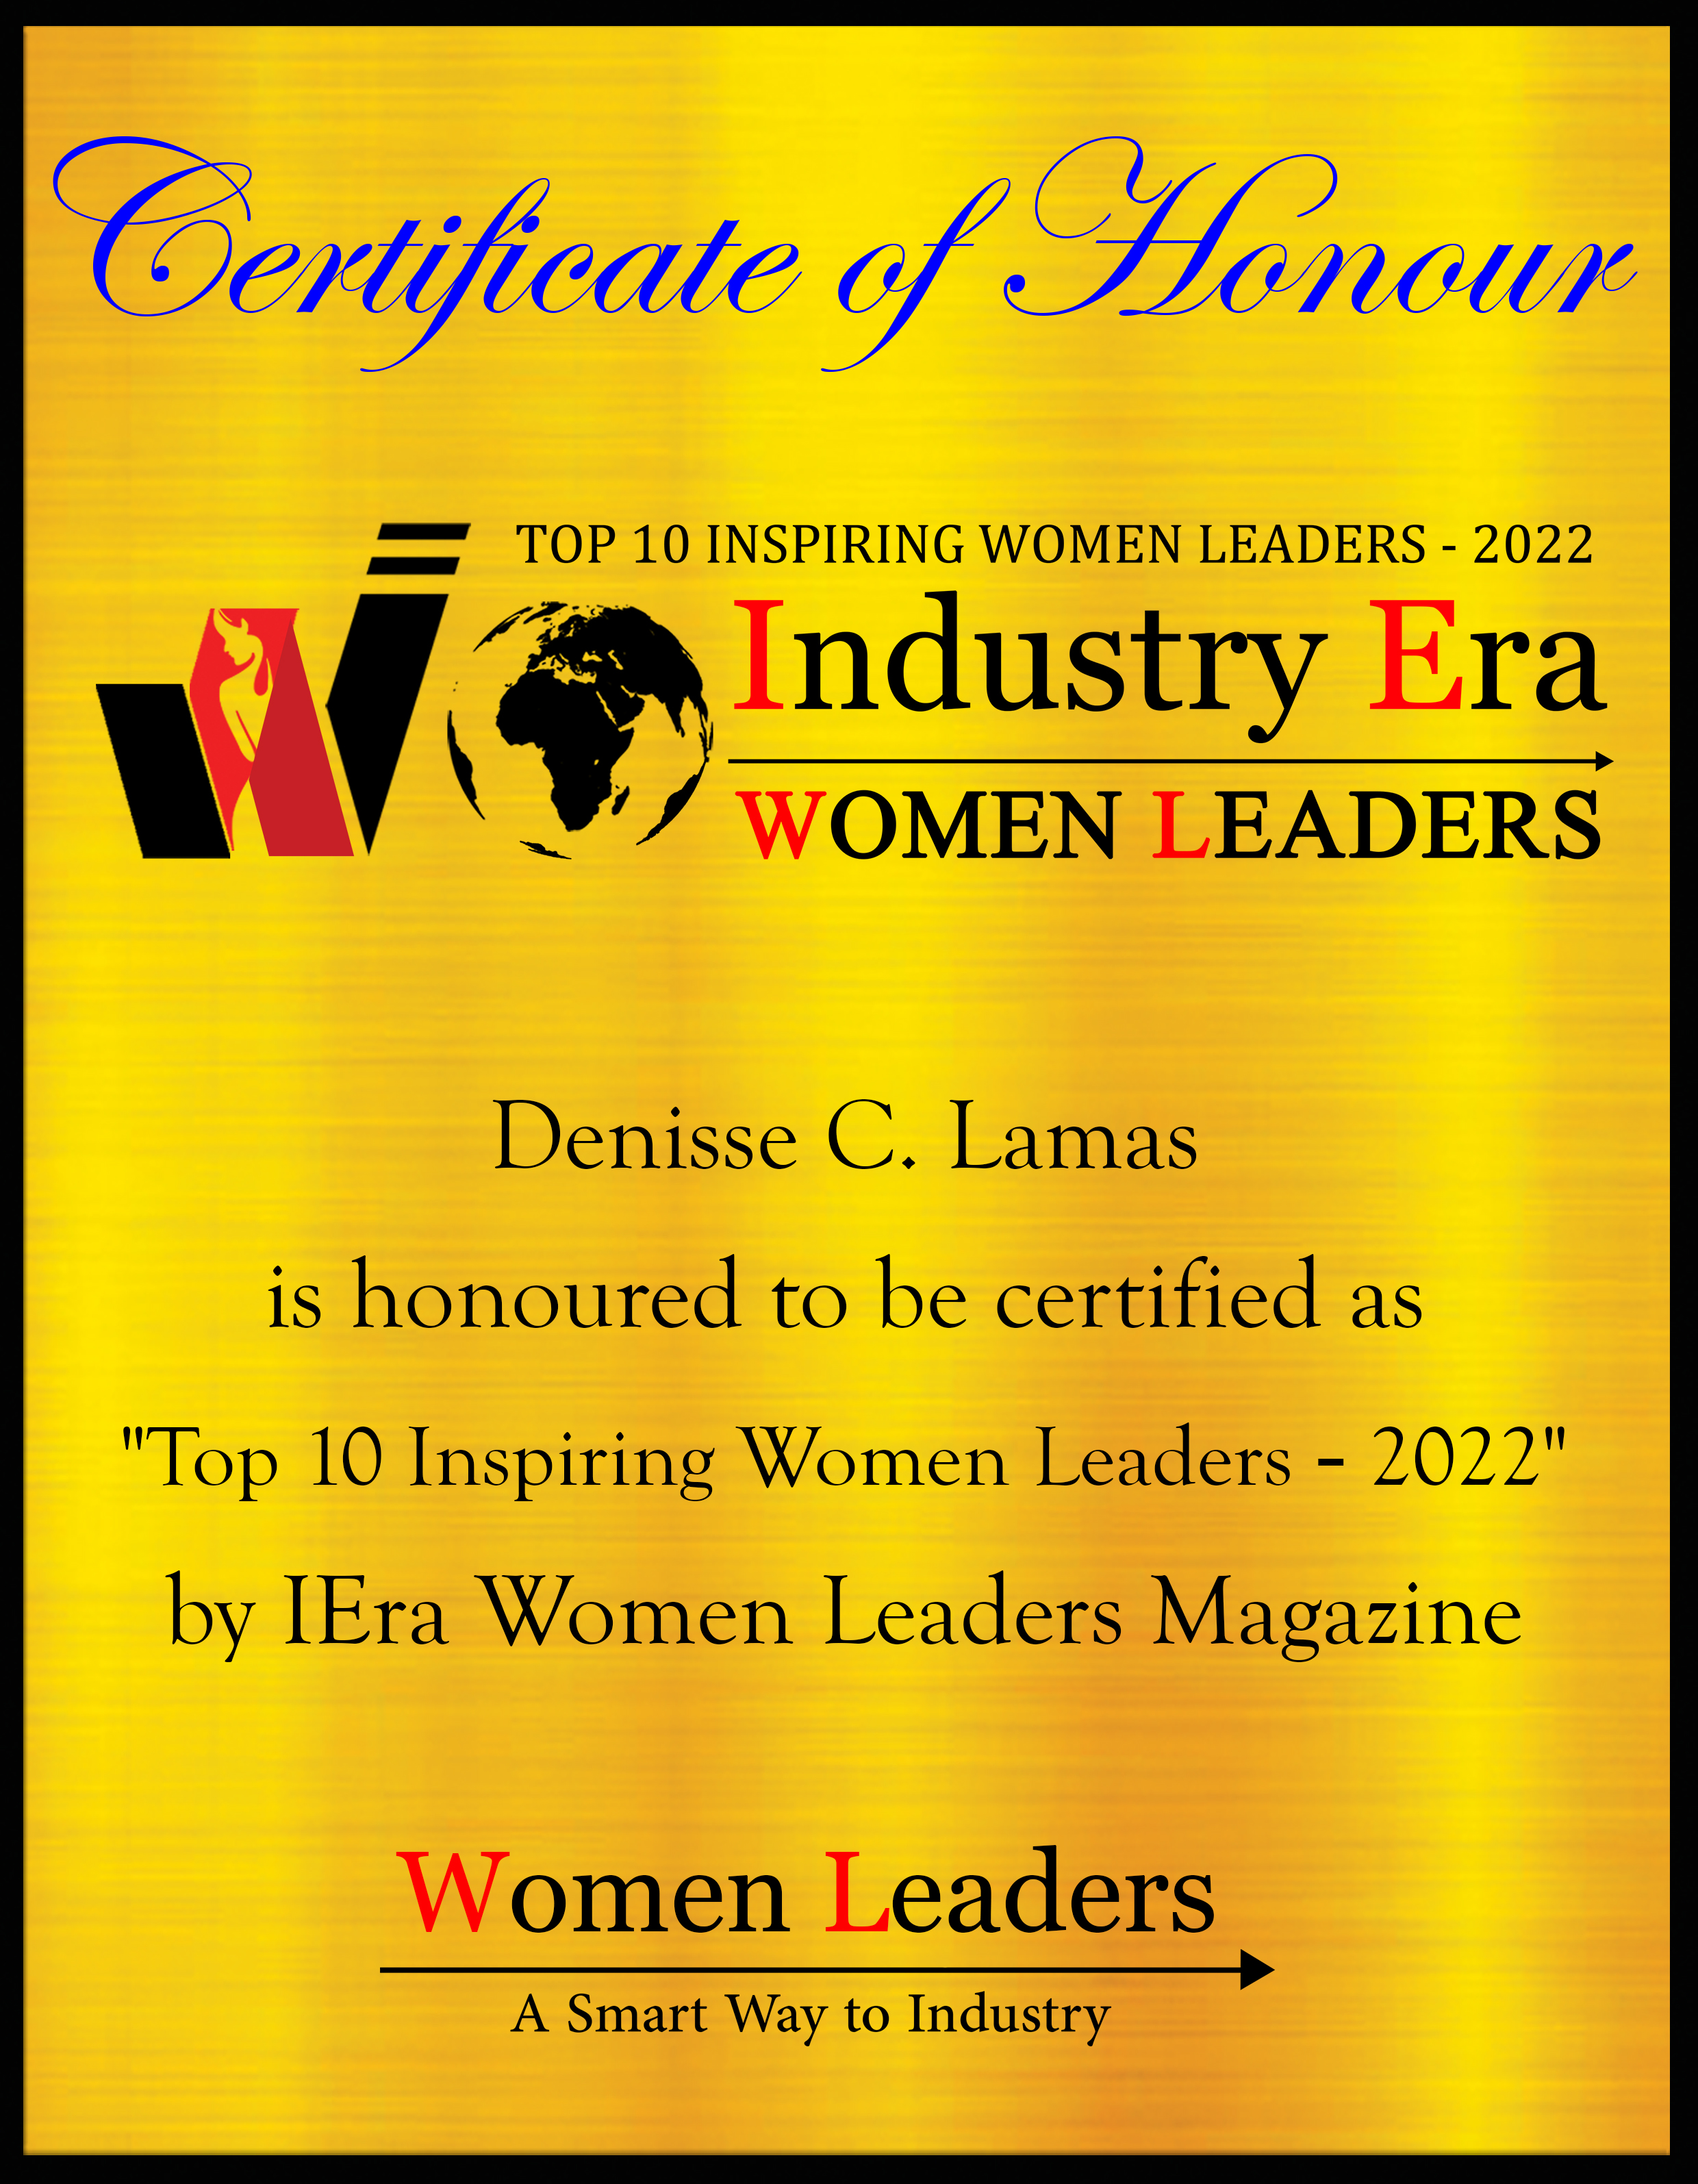 Denisse C. Lamas, Founder & CEO of Hispanic Family Counseling Inc, Top 10 Inspiring Women Leaders of 2022